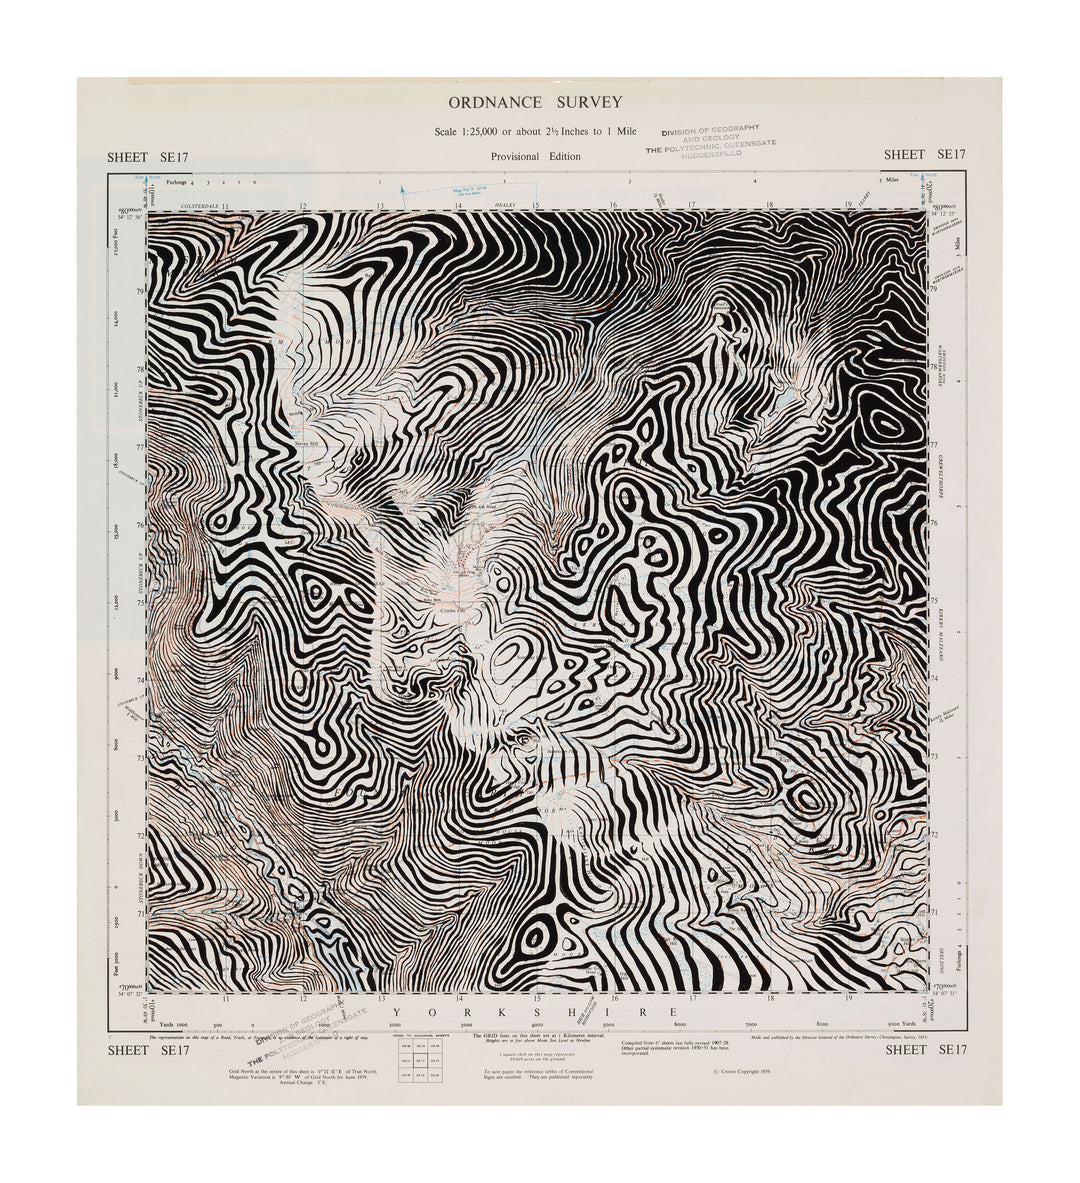 "Fountains Earth, United Kingdom" - a portrait of a man emerging from an abstract pattern drawn onto a black and white topographic map of the Fountains Earth area in Yorkshire by artist Ed Fairburn.